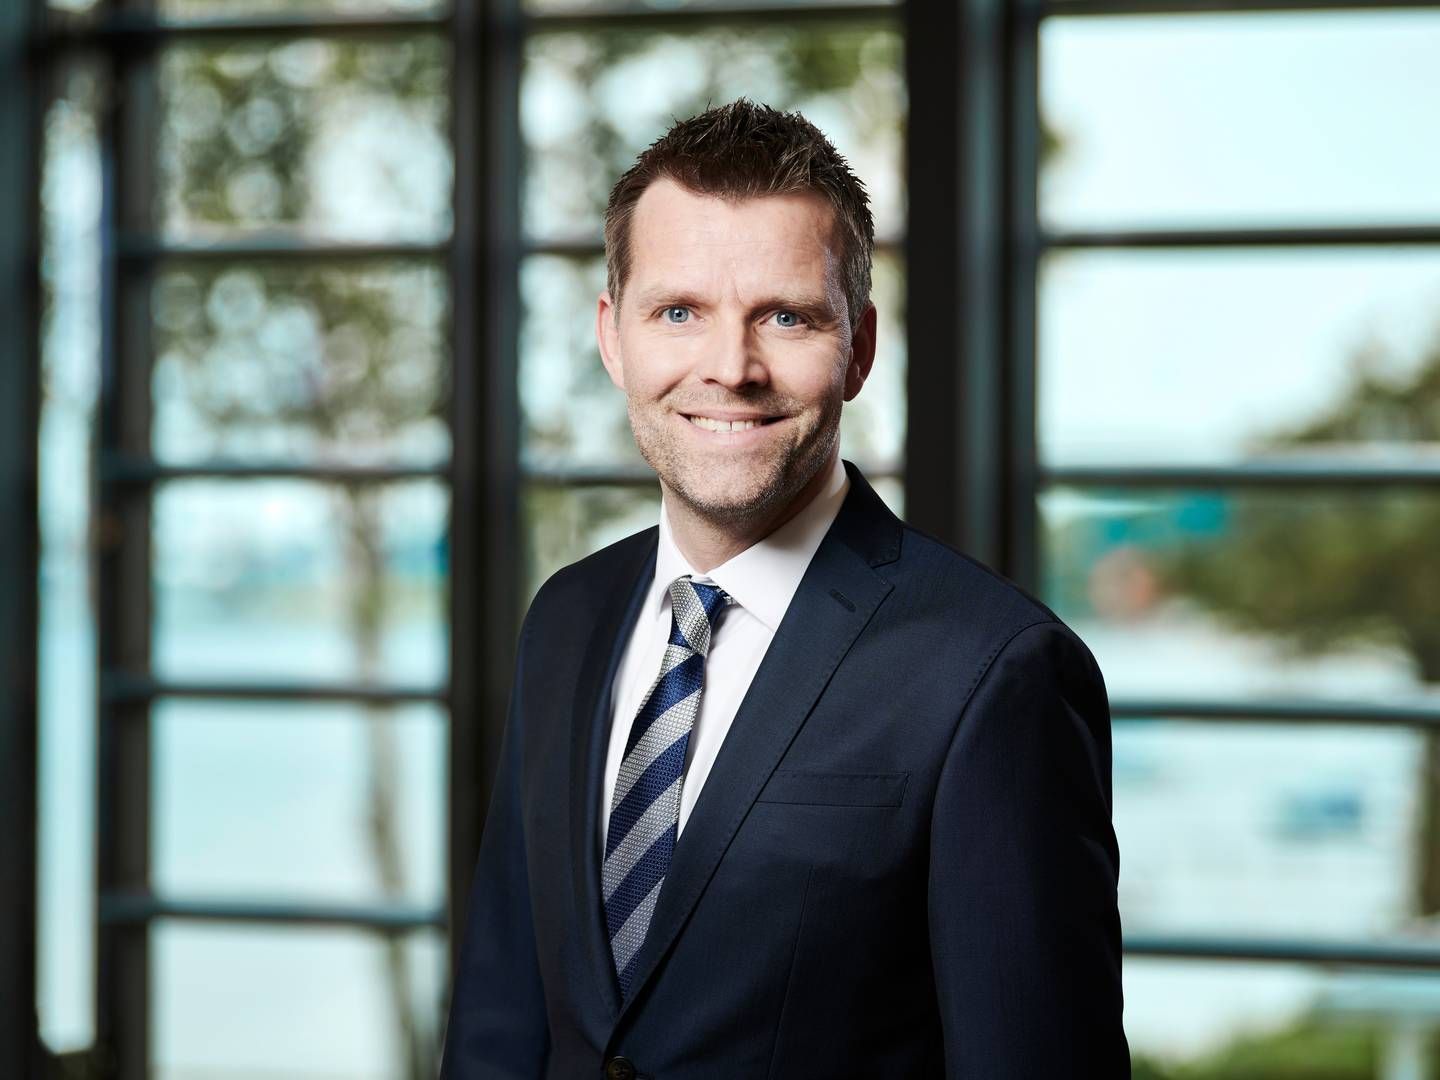 "At Bunker Holding, we have seen an increase in market demand for HSFO from bulk and container shipping companies in recent months, and especially in April. " says Morten Kure Hansen, global head of sourcing at Bunker Holding. | Photo: Pr foto Bunker Holding